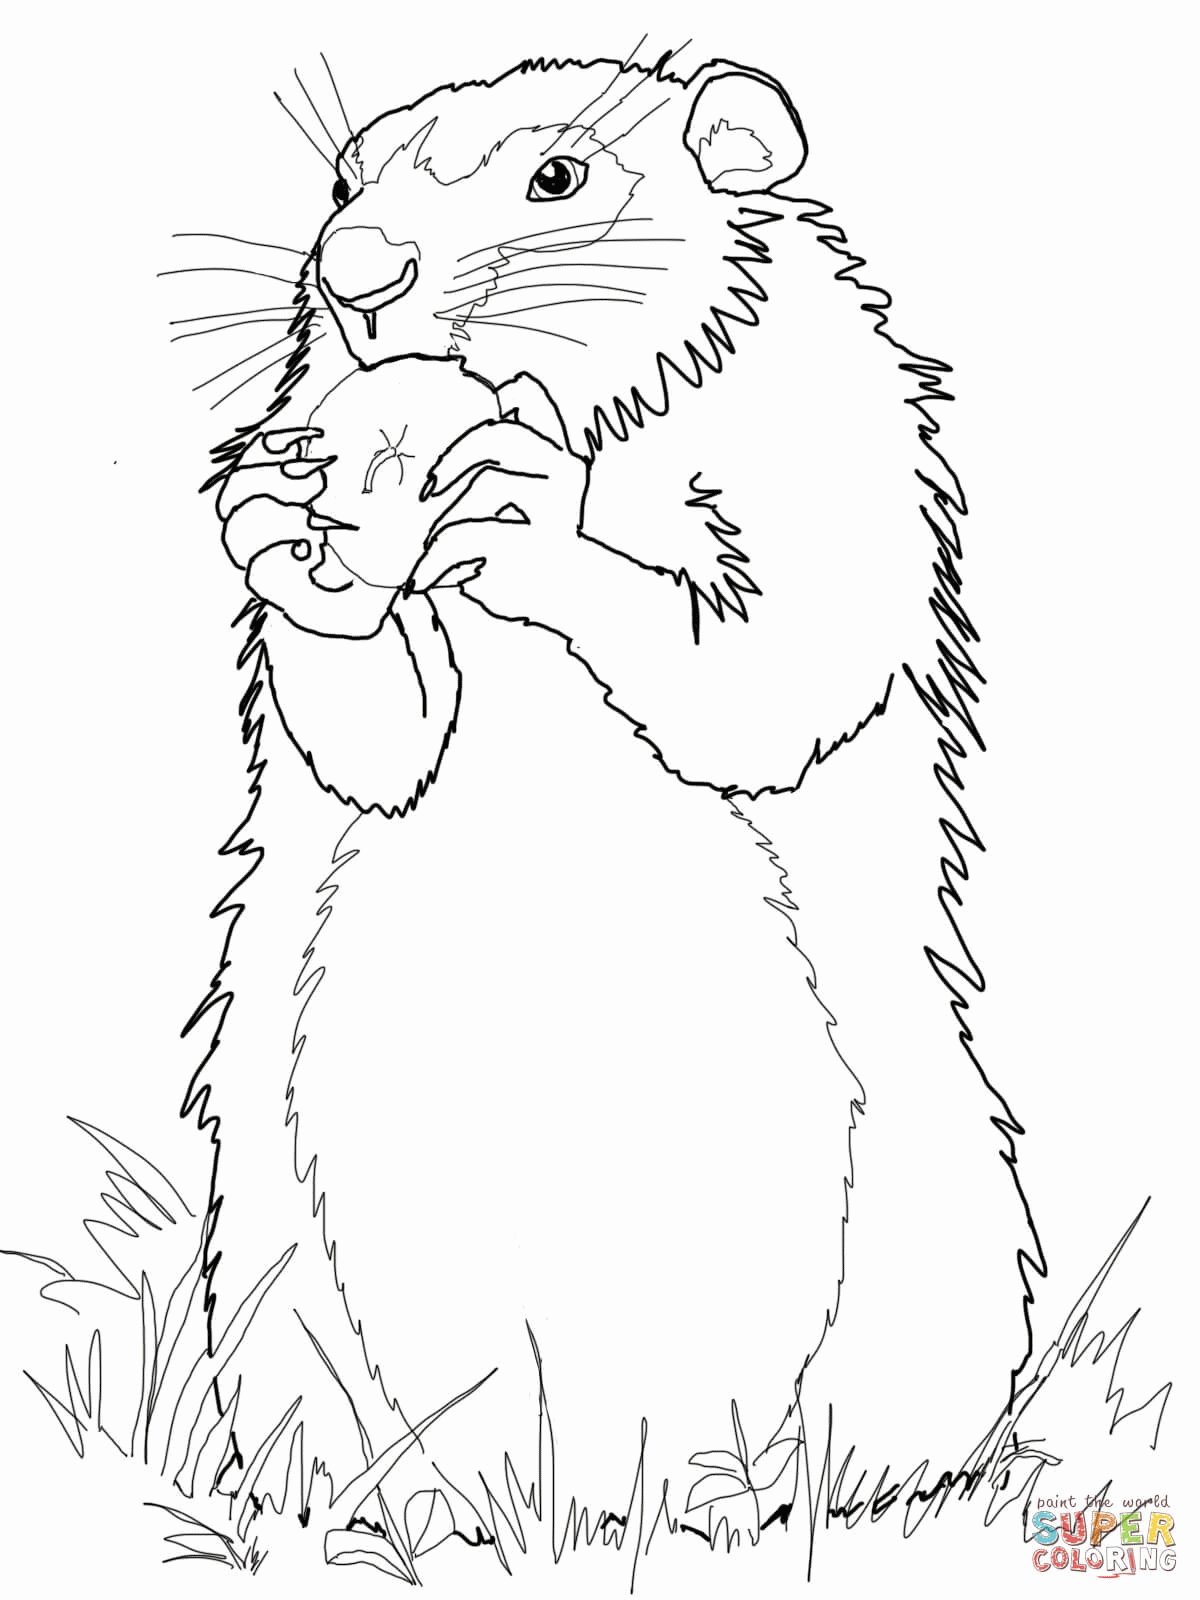 groundhog-day-printable-coloring-pages-boringpop